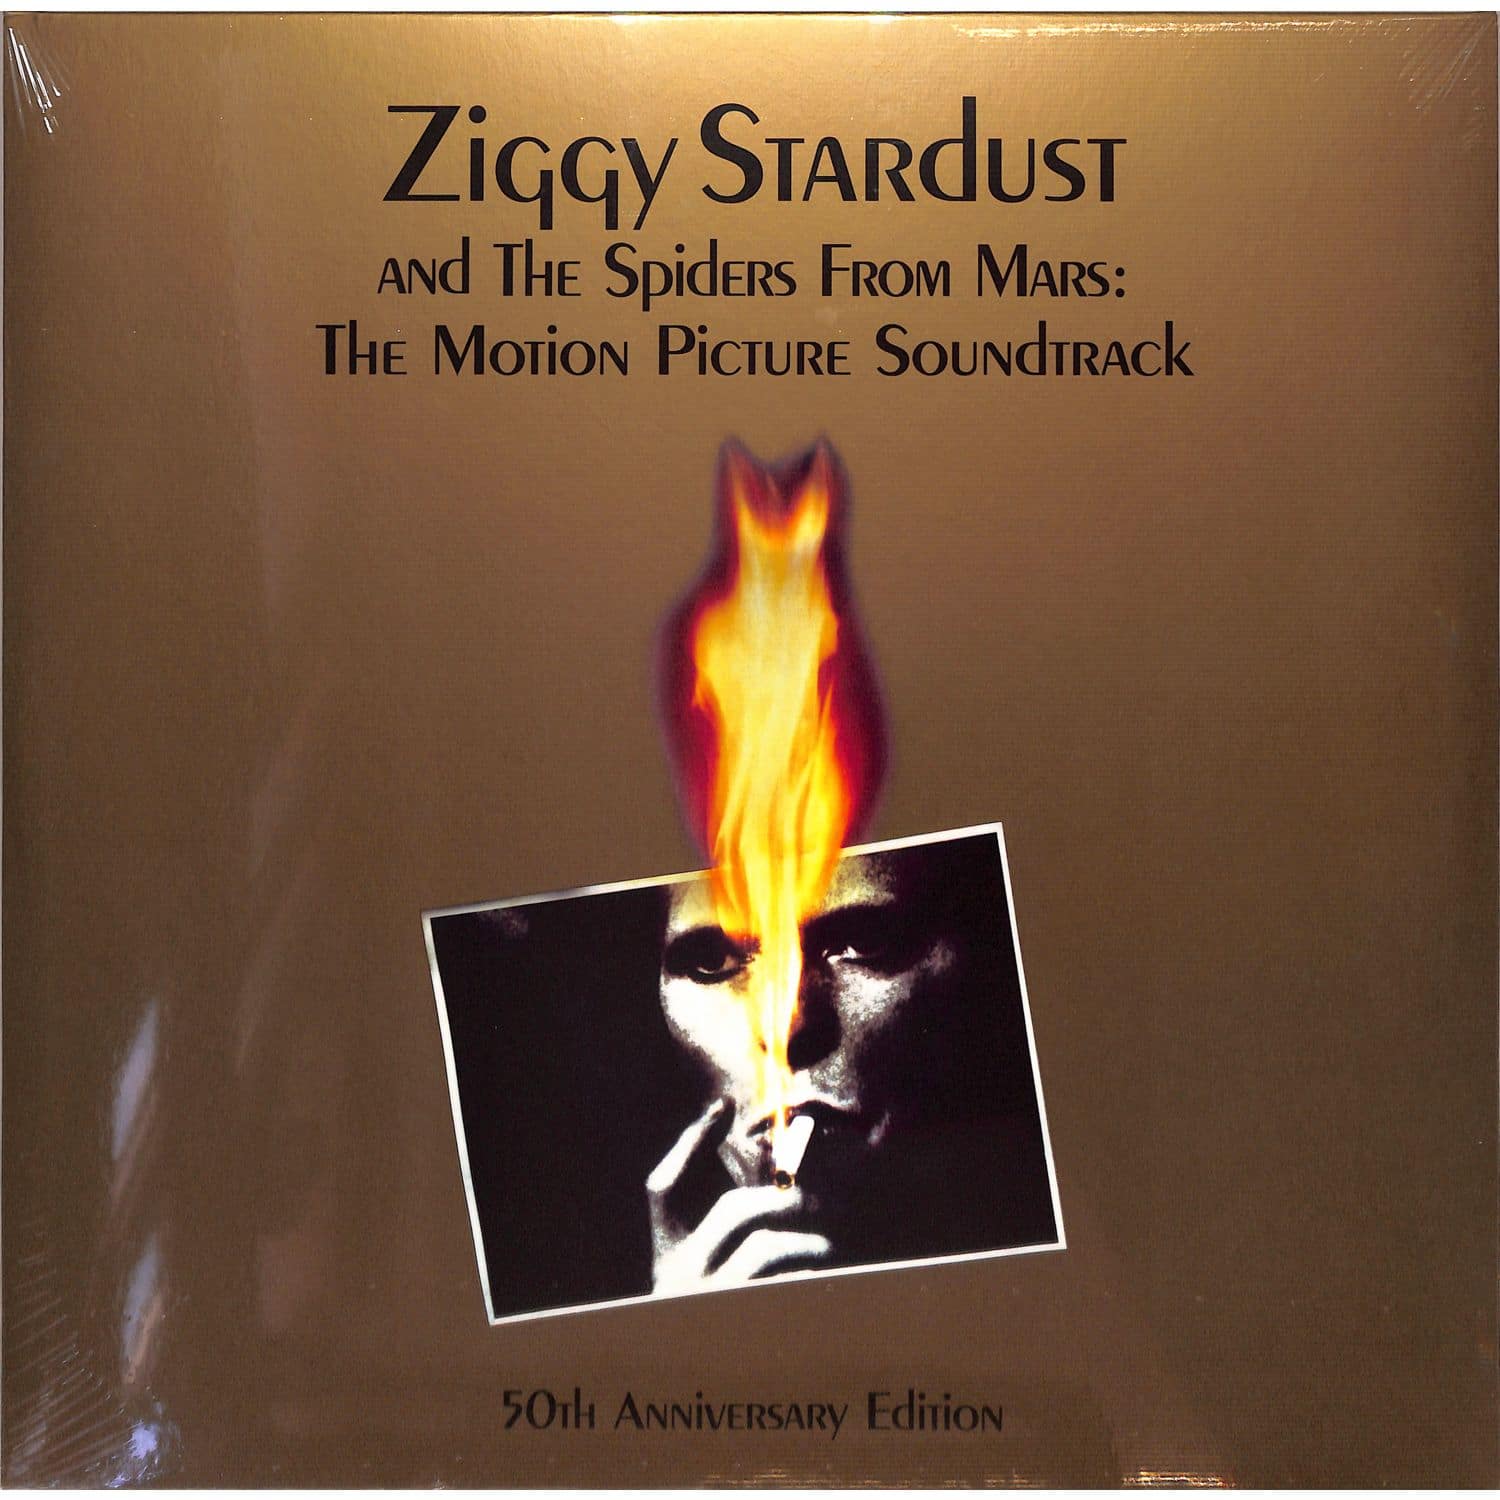 OST / David Bowie - ZIGGY STARDUST AND THE SPIDERS FROM MARS: 